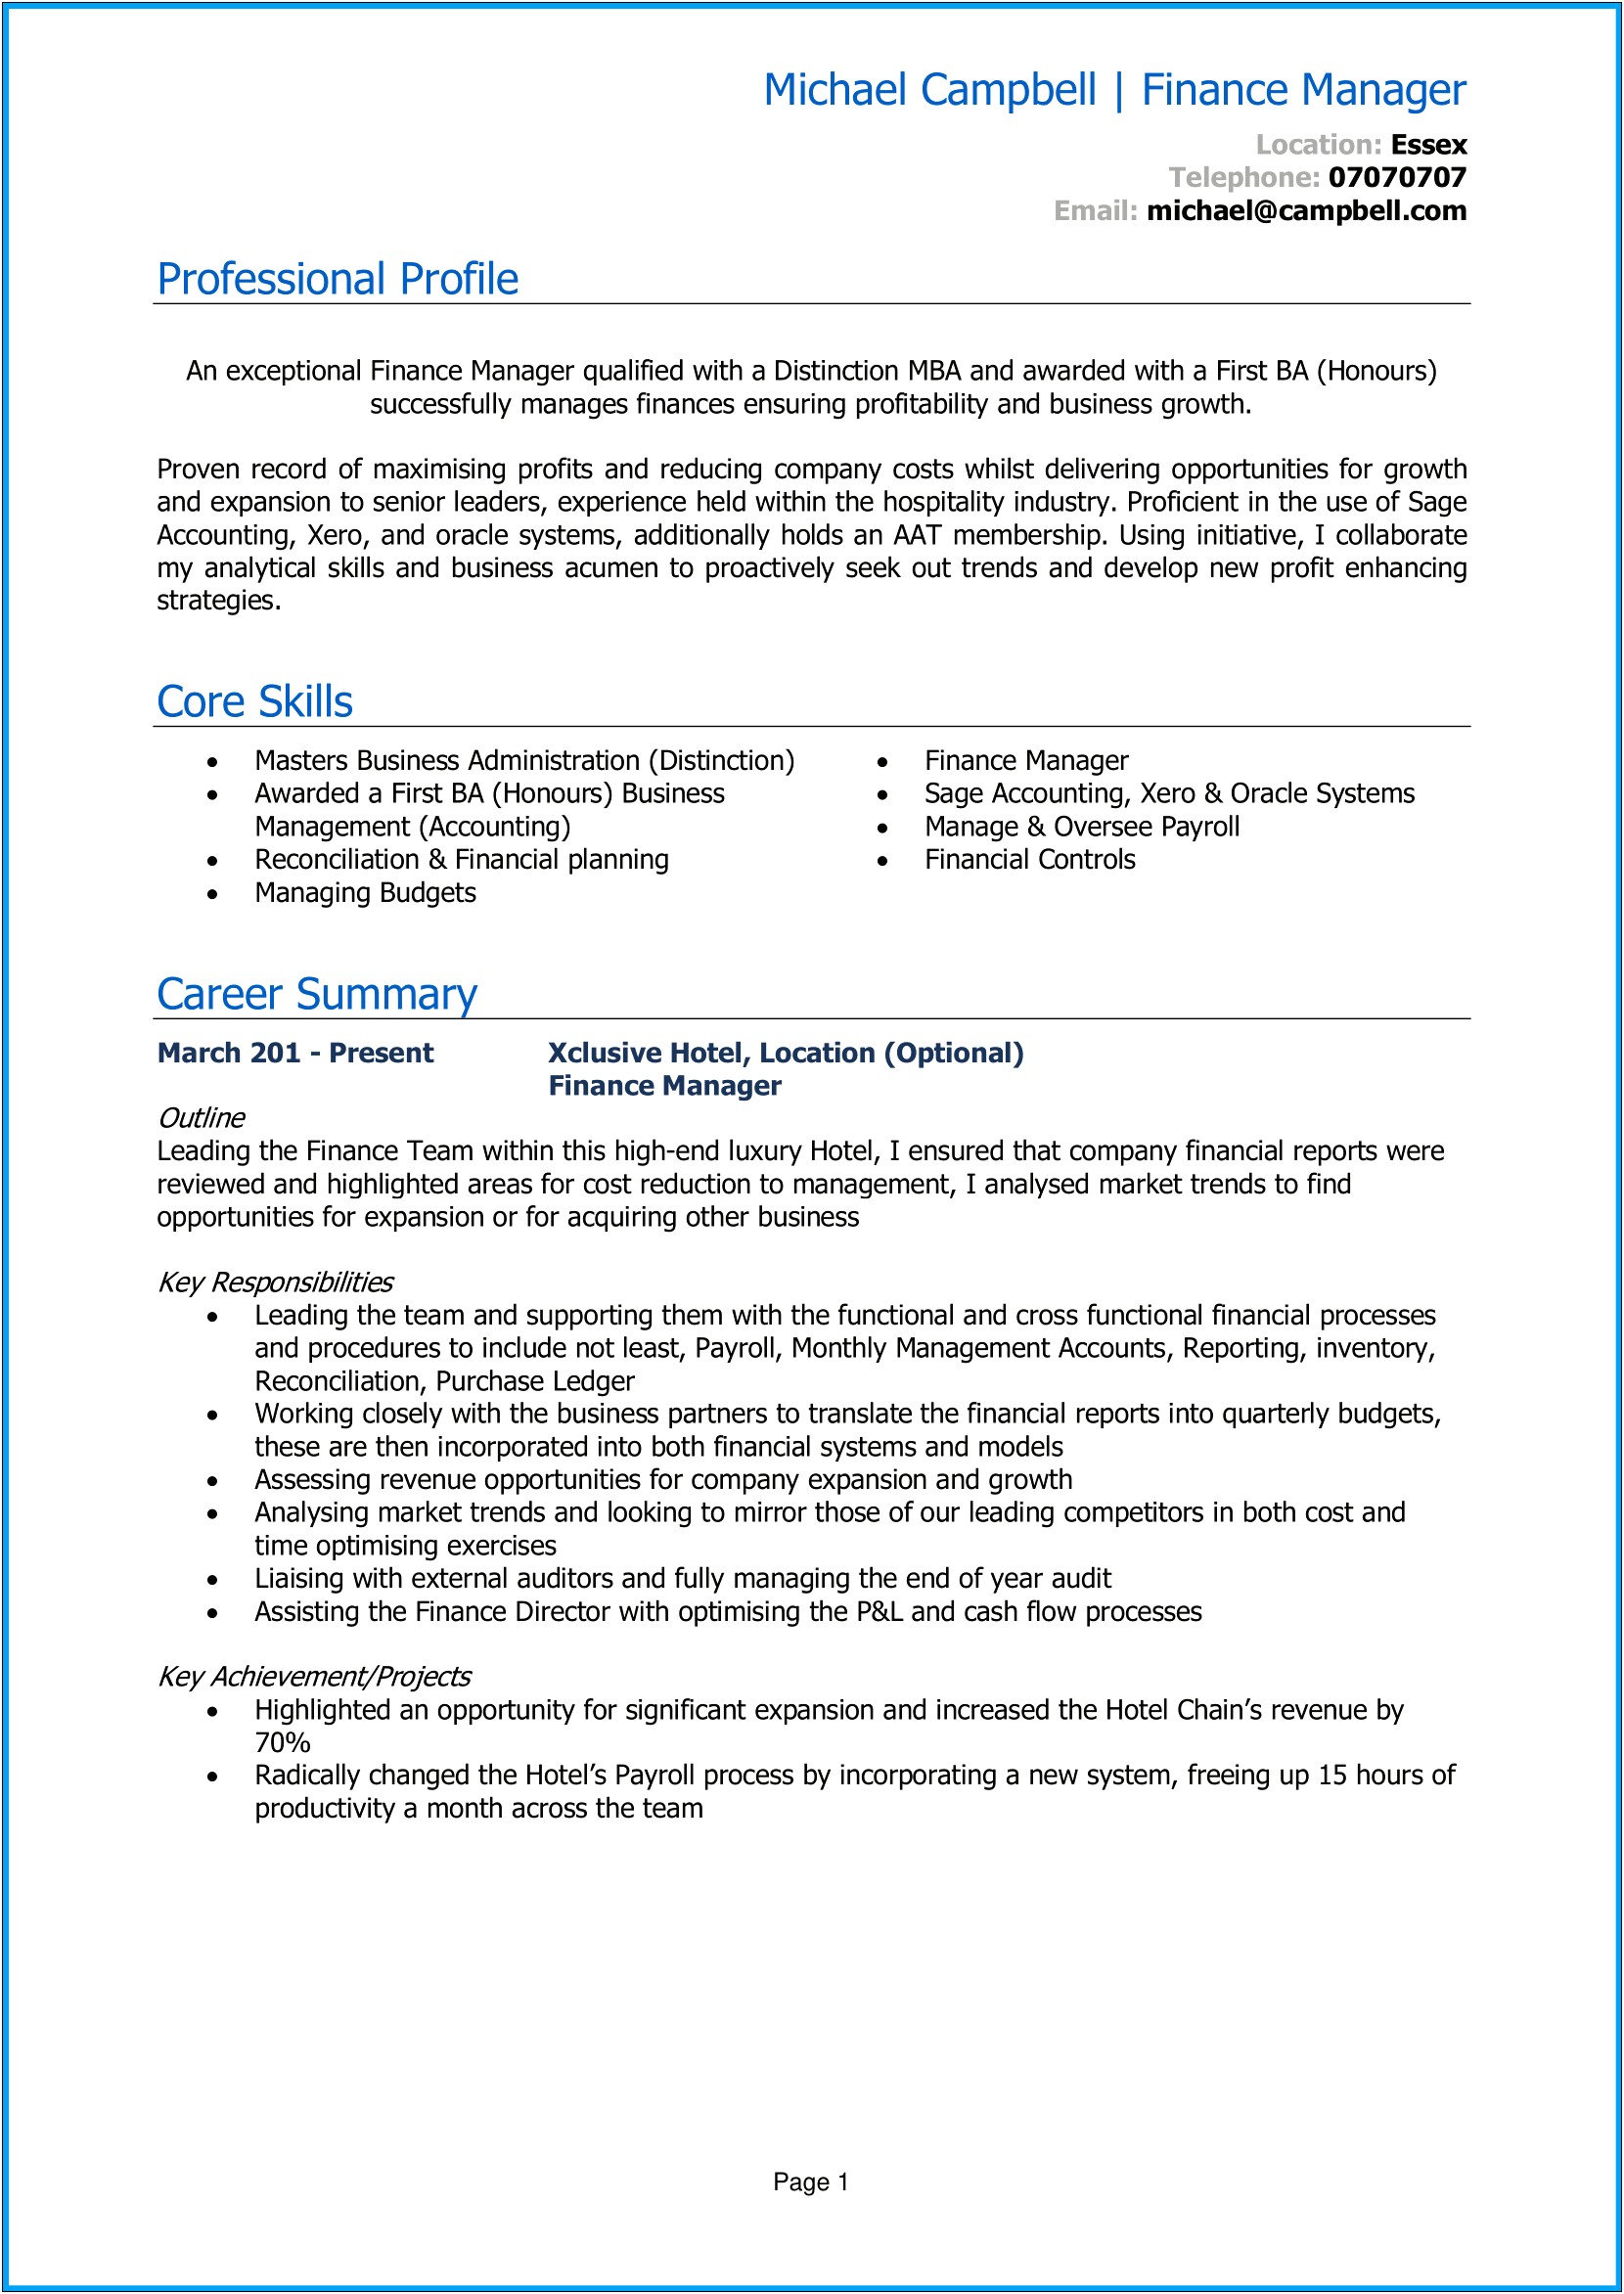 Resume Cover Letter For Automotive Finance Manager